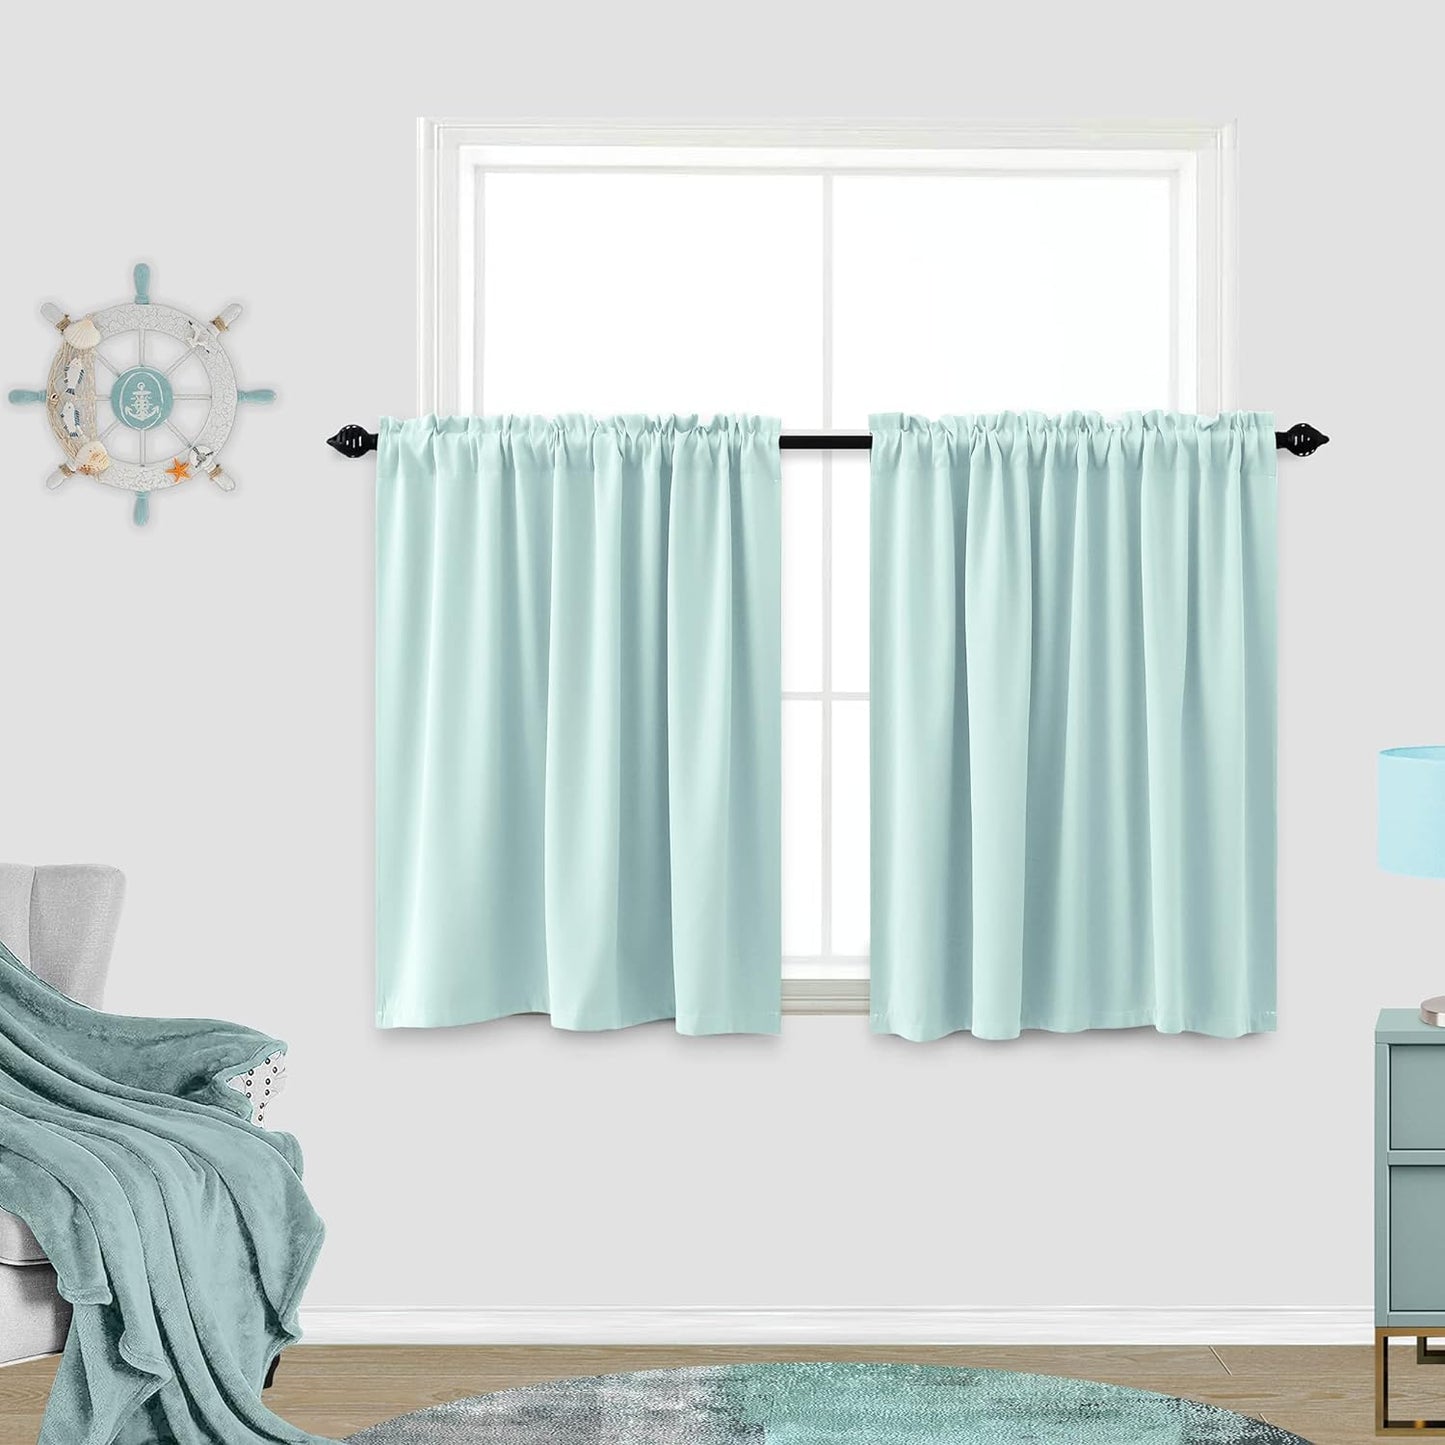 KOUFALL Sage Green Curtains 24 Inch Length for Bathroom Window 2 Pack Rod Pocket Room Darkening Cafe Curtain Tiers Blackout Light Green Short Curtains for Small Windows 34 by 24 in Long  KOUFALL TEXTILE Aqua 34X24 